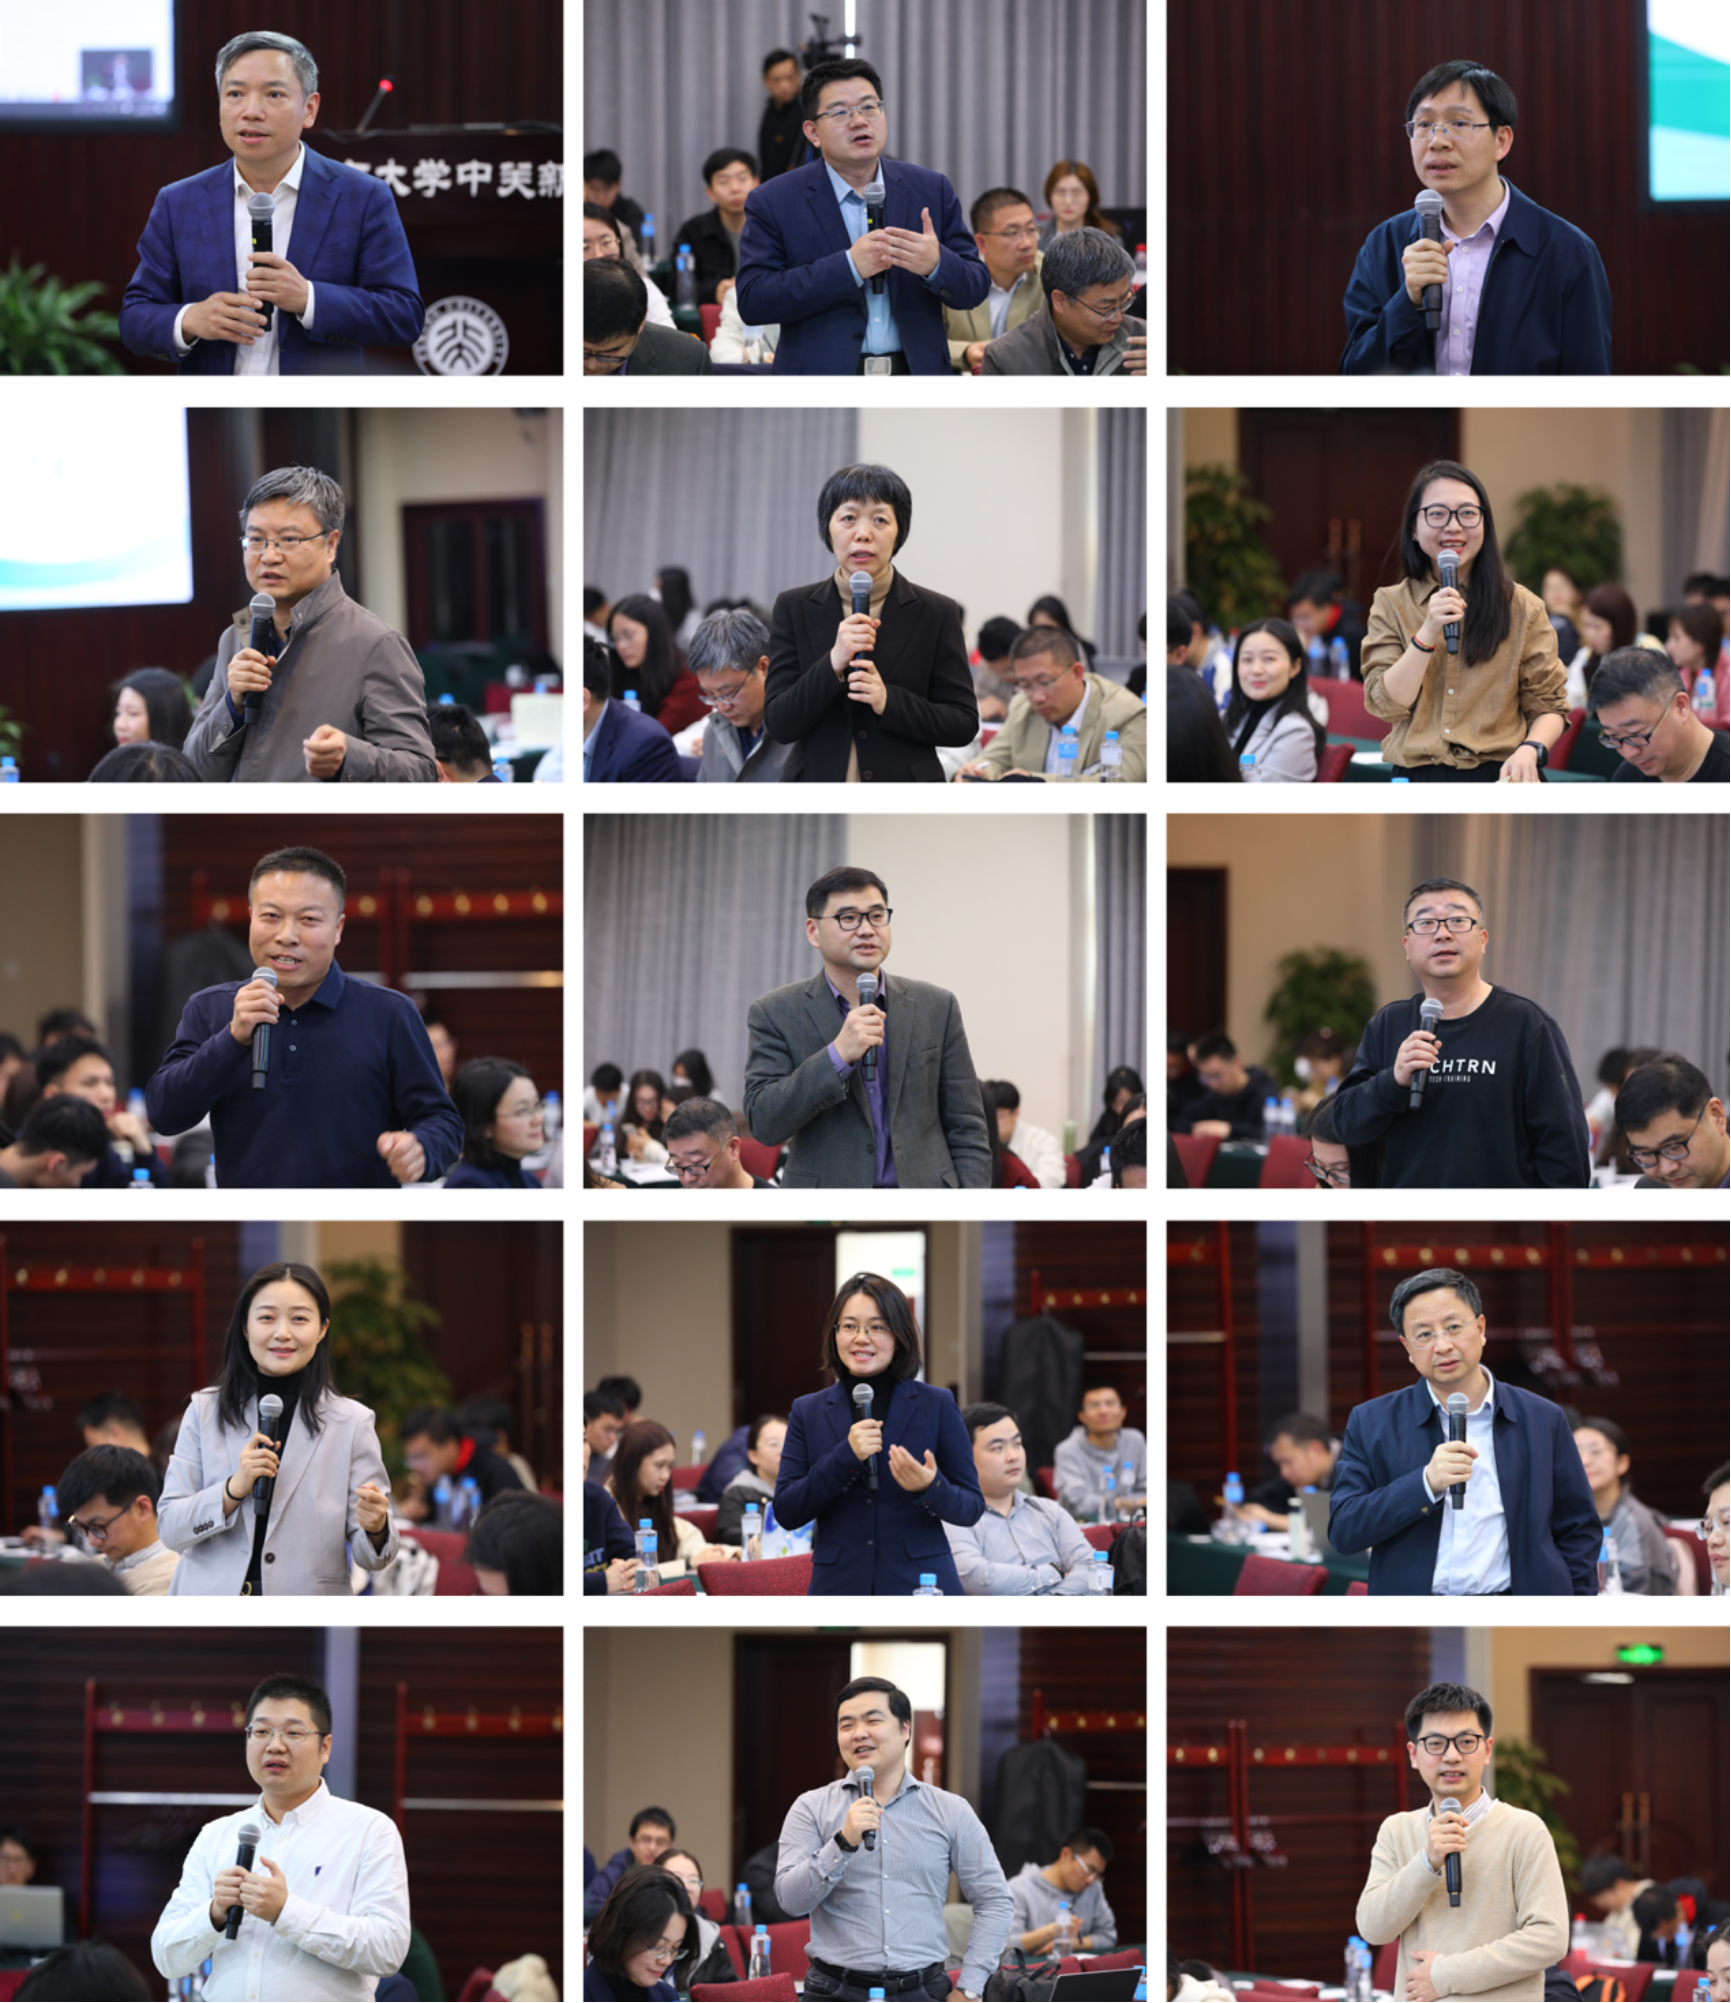 A collage of a person holding a microphone

Description automatically generated